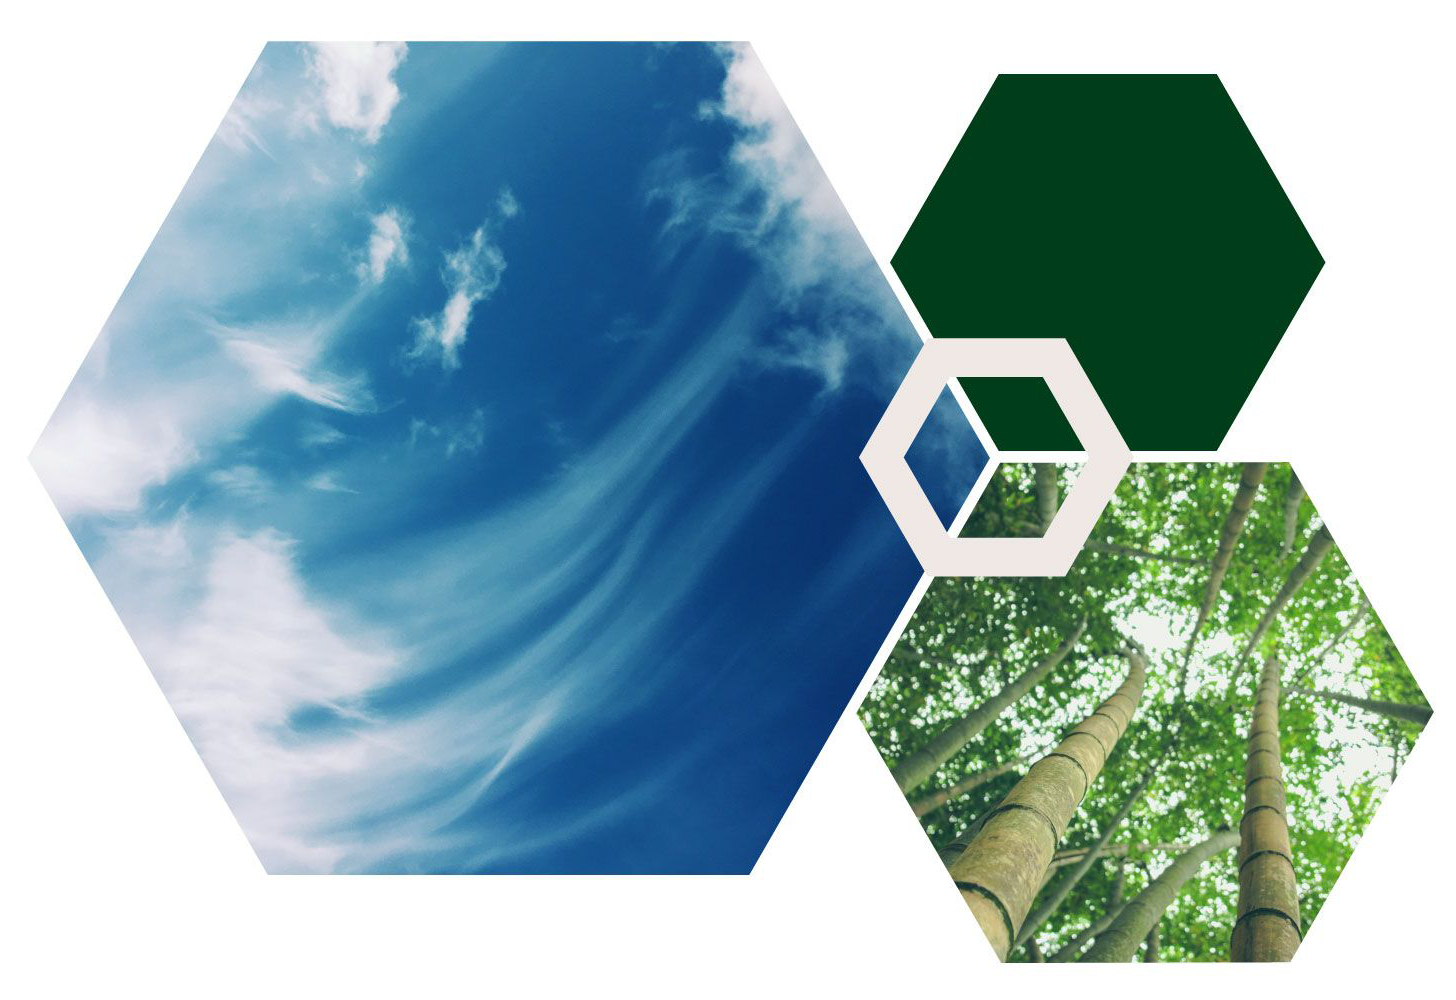 Hexagon collage featuring images of clouds and an image of established tree